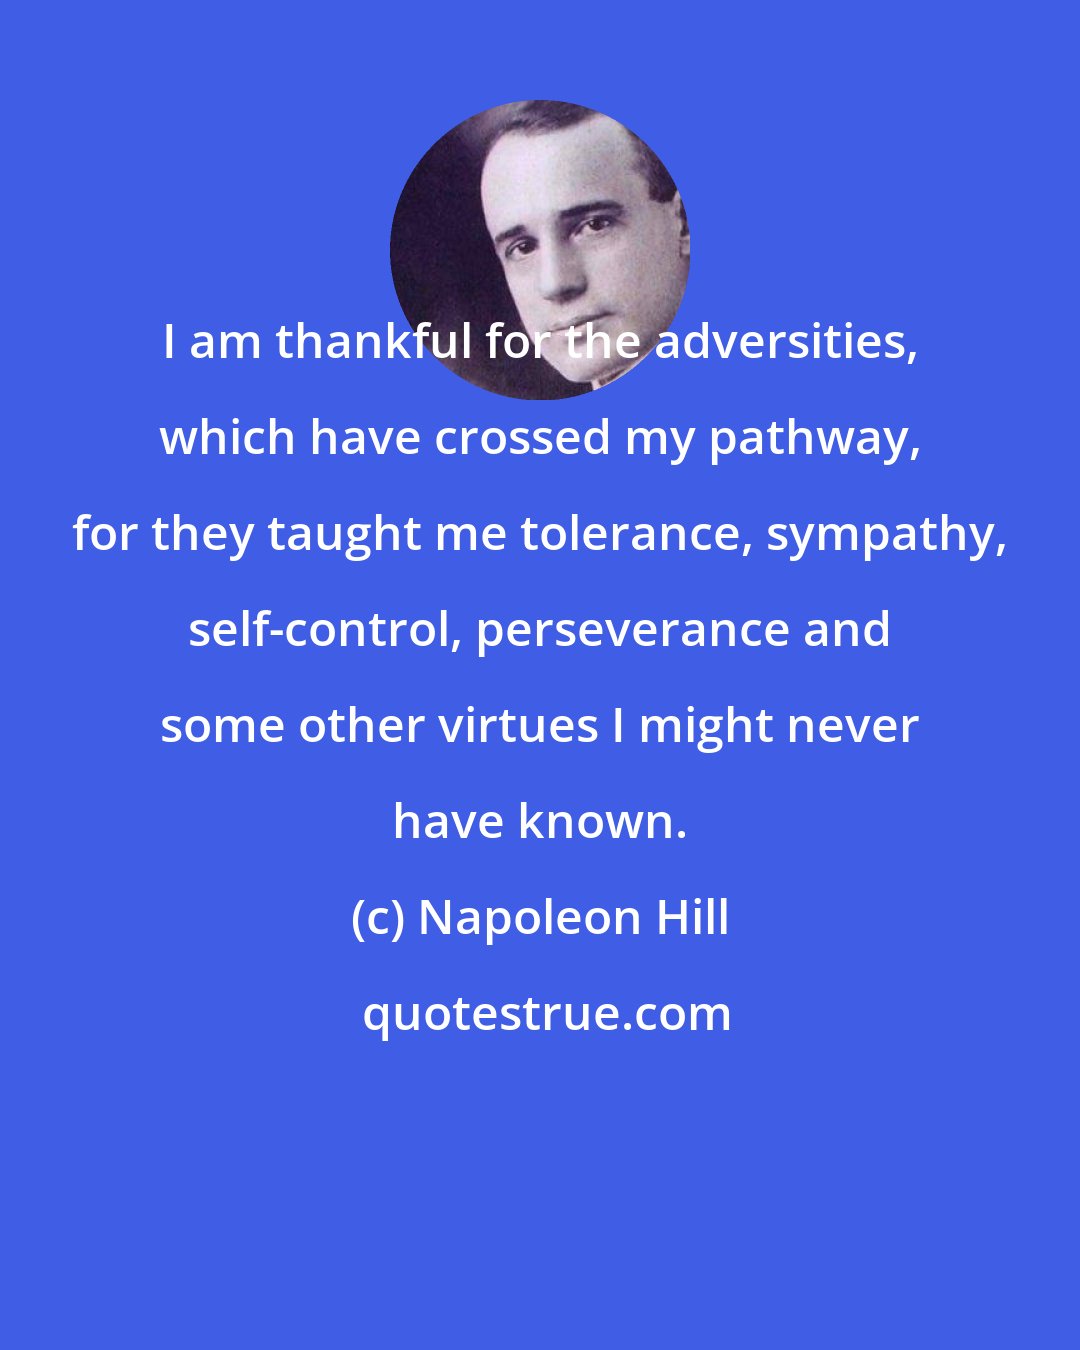 Napoleon Hill: I am thankful for the adversities, which have crossed my pathway, for they taught me tolerance, sympathy, self-control, perseverance and some other virtues I might never have known.